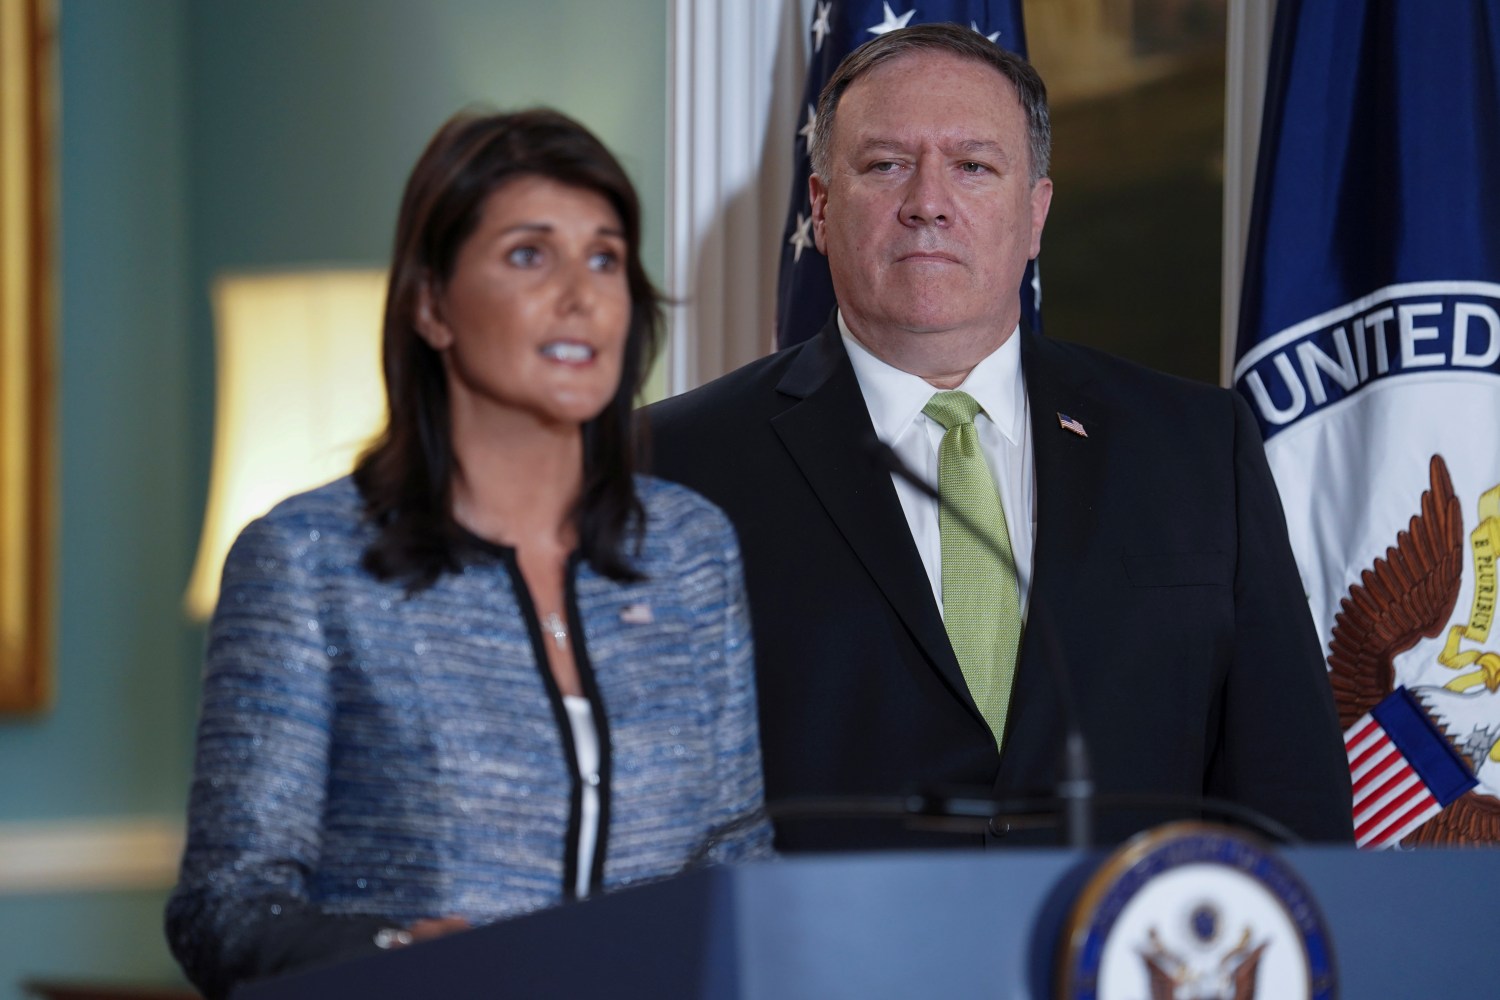 U.S. Ambassador to the United Nations Nikki Haley delivers remarks to the press together with U.S. Secretary of State Mike Pompeo, announcing the U.S.'s withdrawal from the U.N's Human Rights Council at the Department of State in Washington, U.S., June 19, 2018. REUTERS/Toya Sarno Jordan - RC13BD79BC40